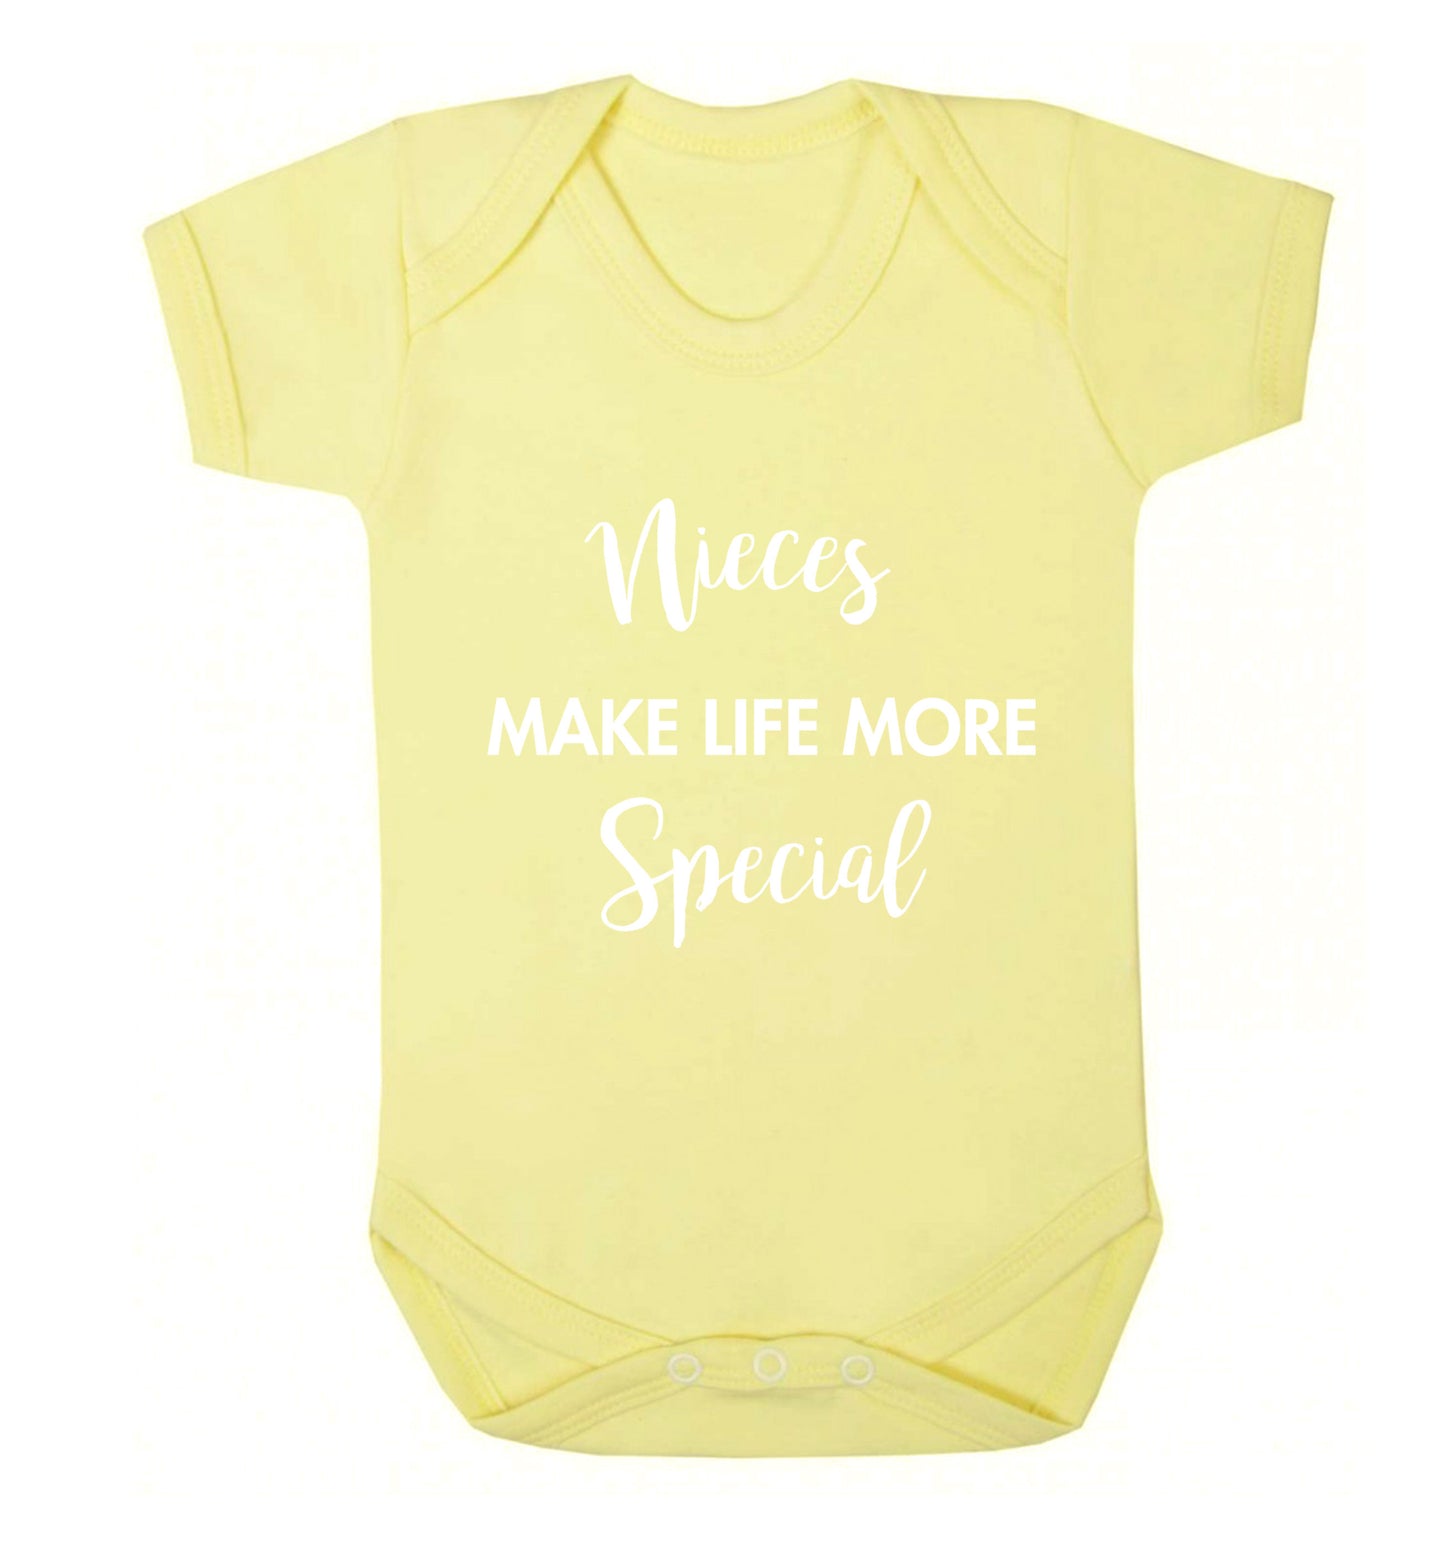 Nieces make life more special Baby Vest pale yellow 18-24 months